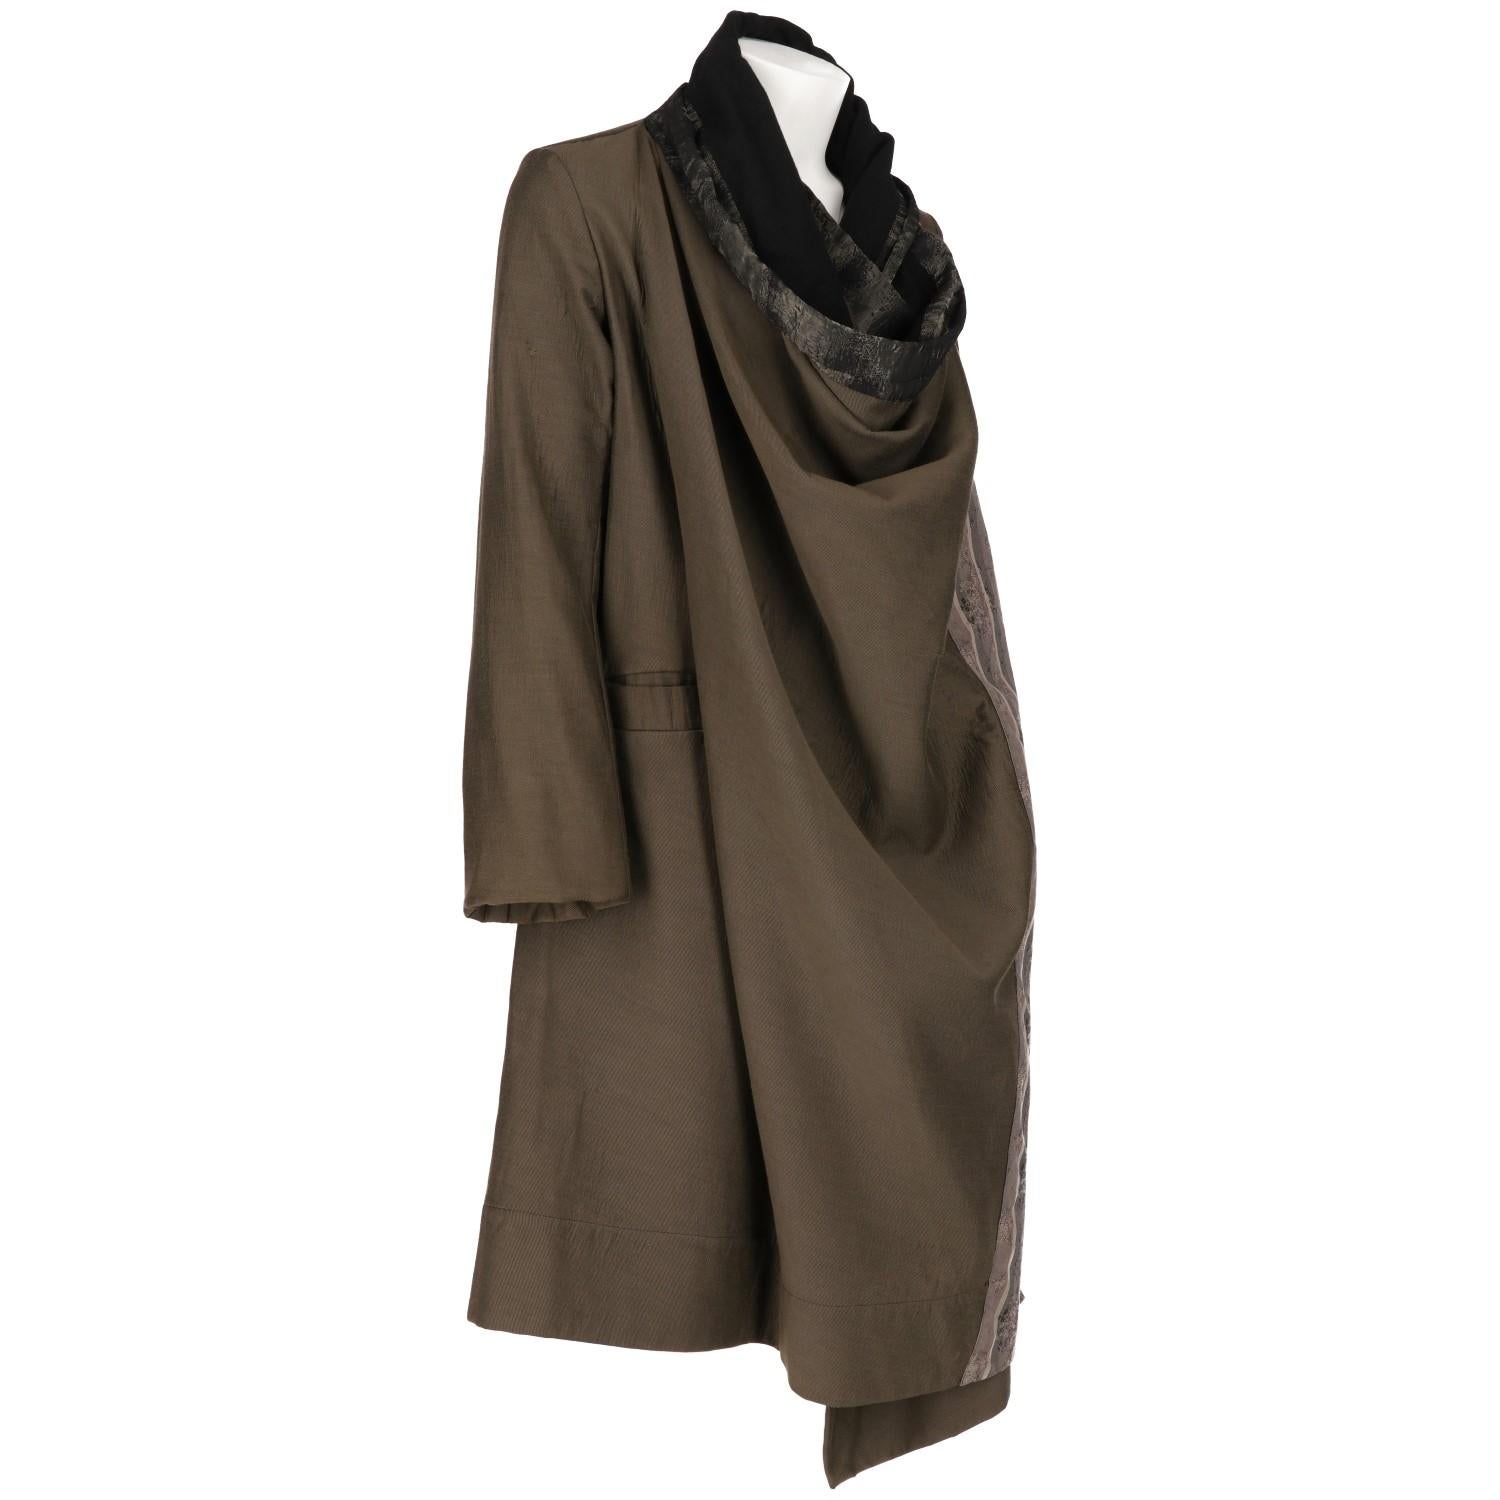 A.N.G.E.L.O. Vintage - Italy

Marvelous Antonio Marras coat in khaki blend cotton fabric with contrasting striped panels. It features an asymmetric and loosing style, and wrap closure with buttons on the shoulders. Two wide welt pockets. Lined in